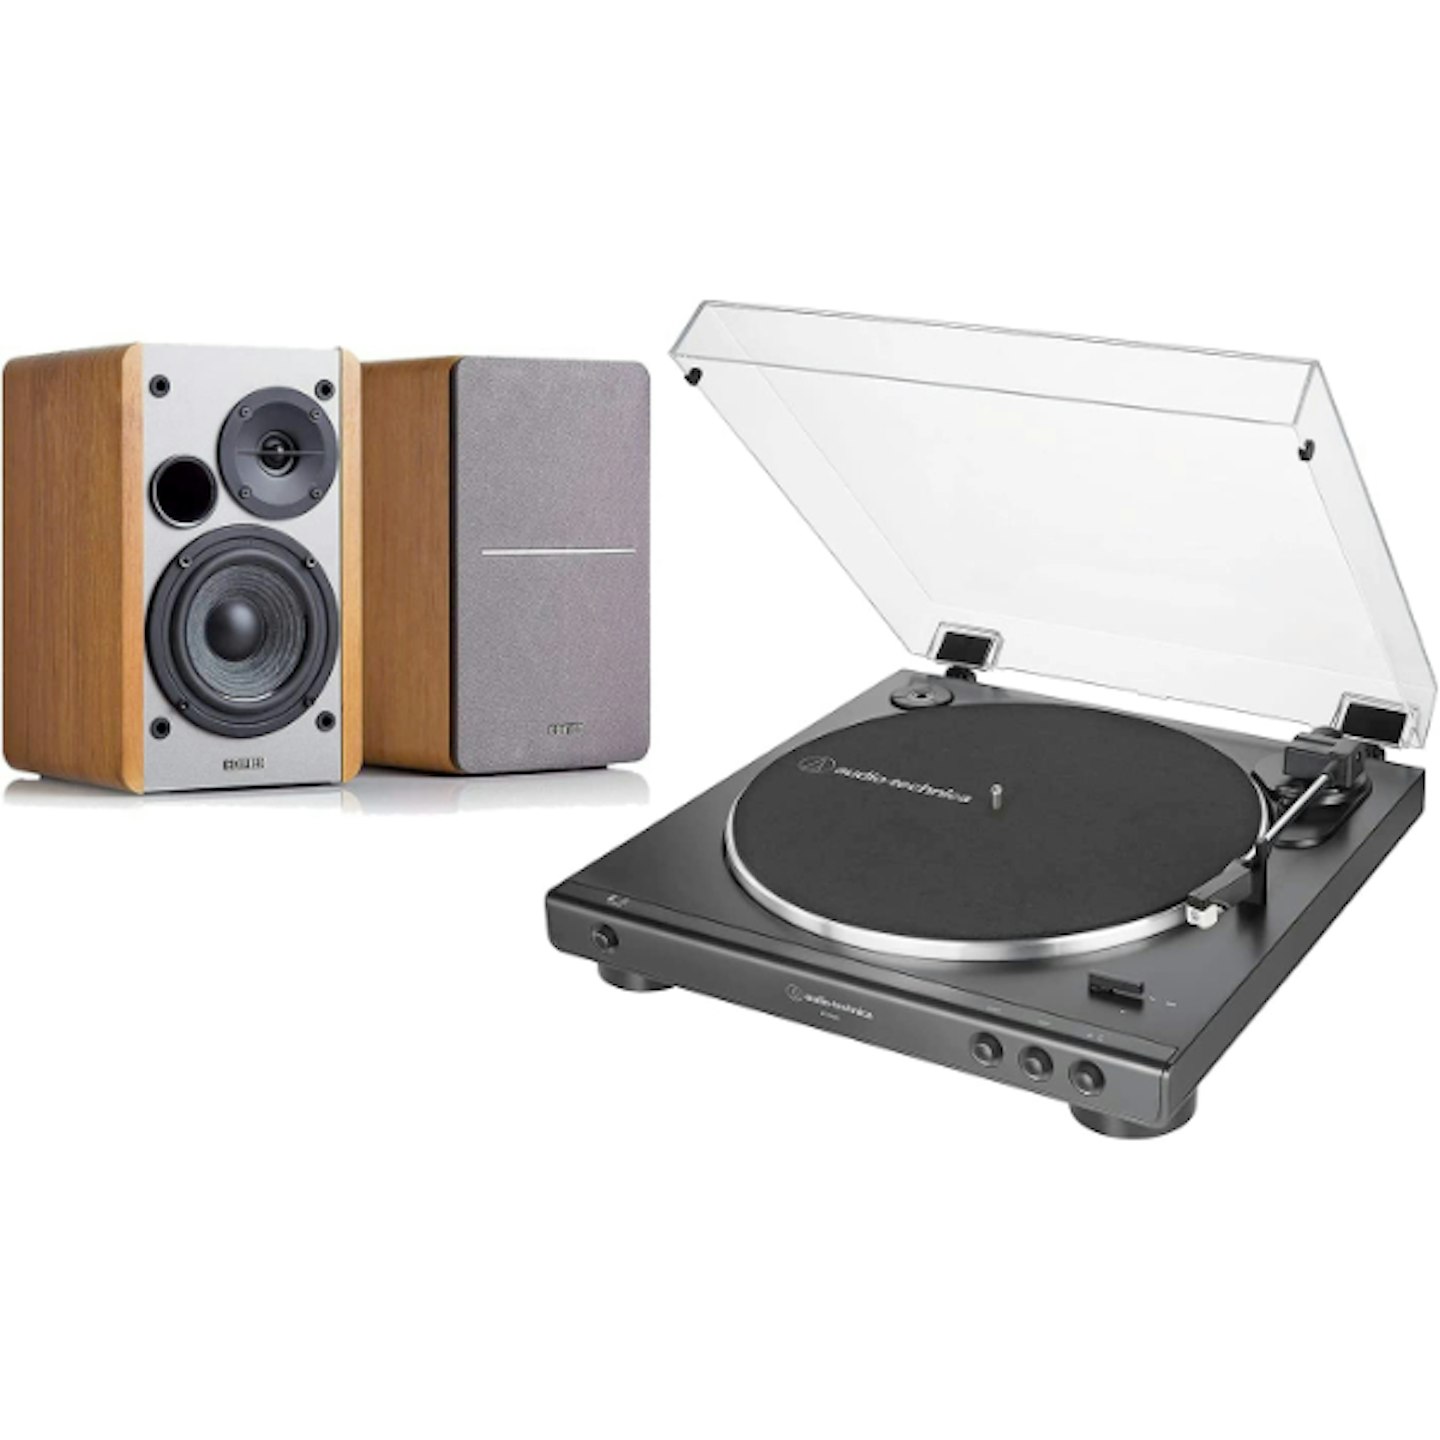 Audio-Technica AT-LP60X Turntable and Edifier R1280T Active Speaker Package